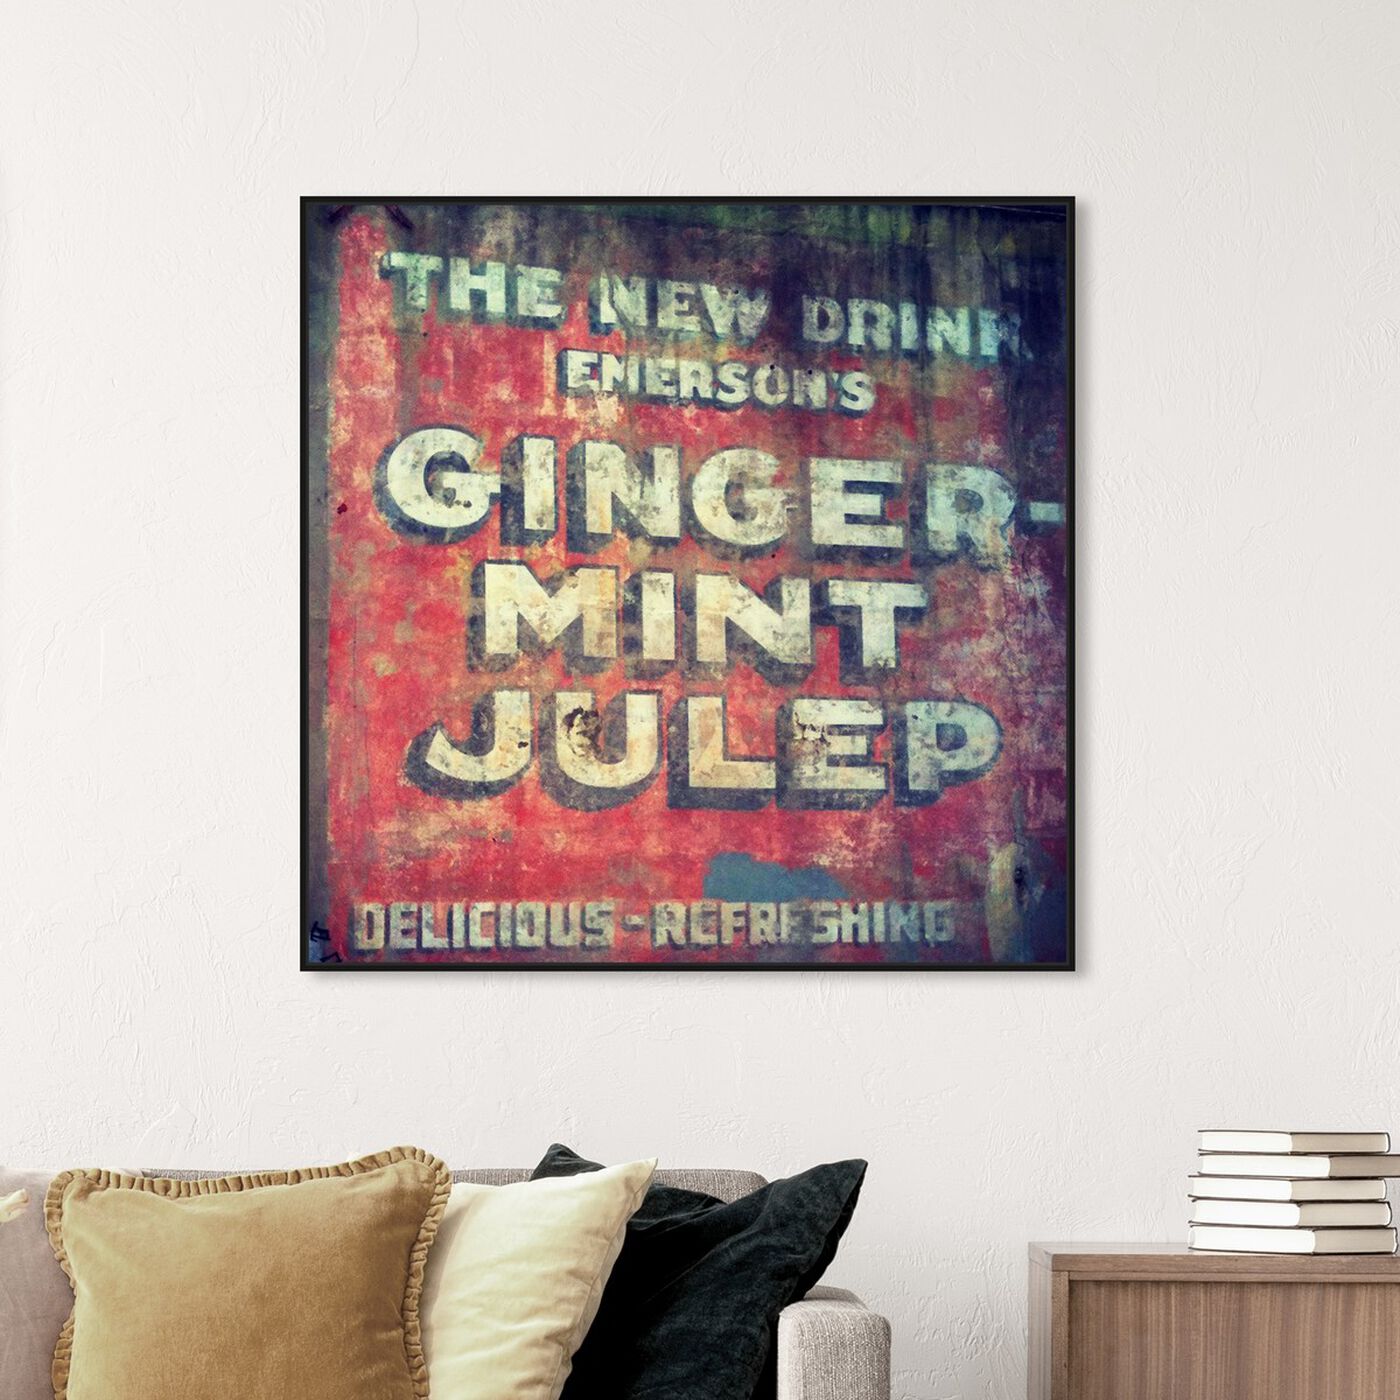 Hanging view of Ginger Mint Julep featuring advertising and promotional brands art.